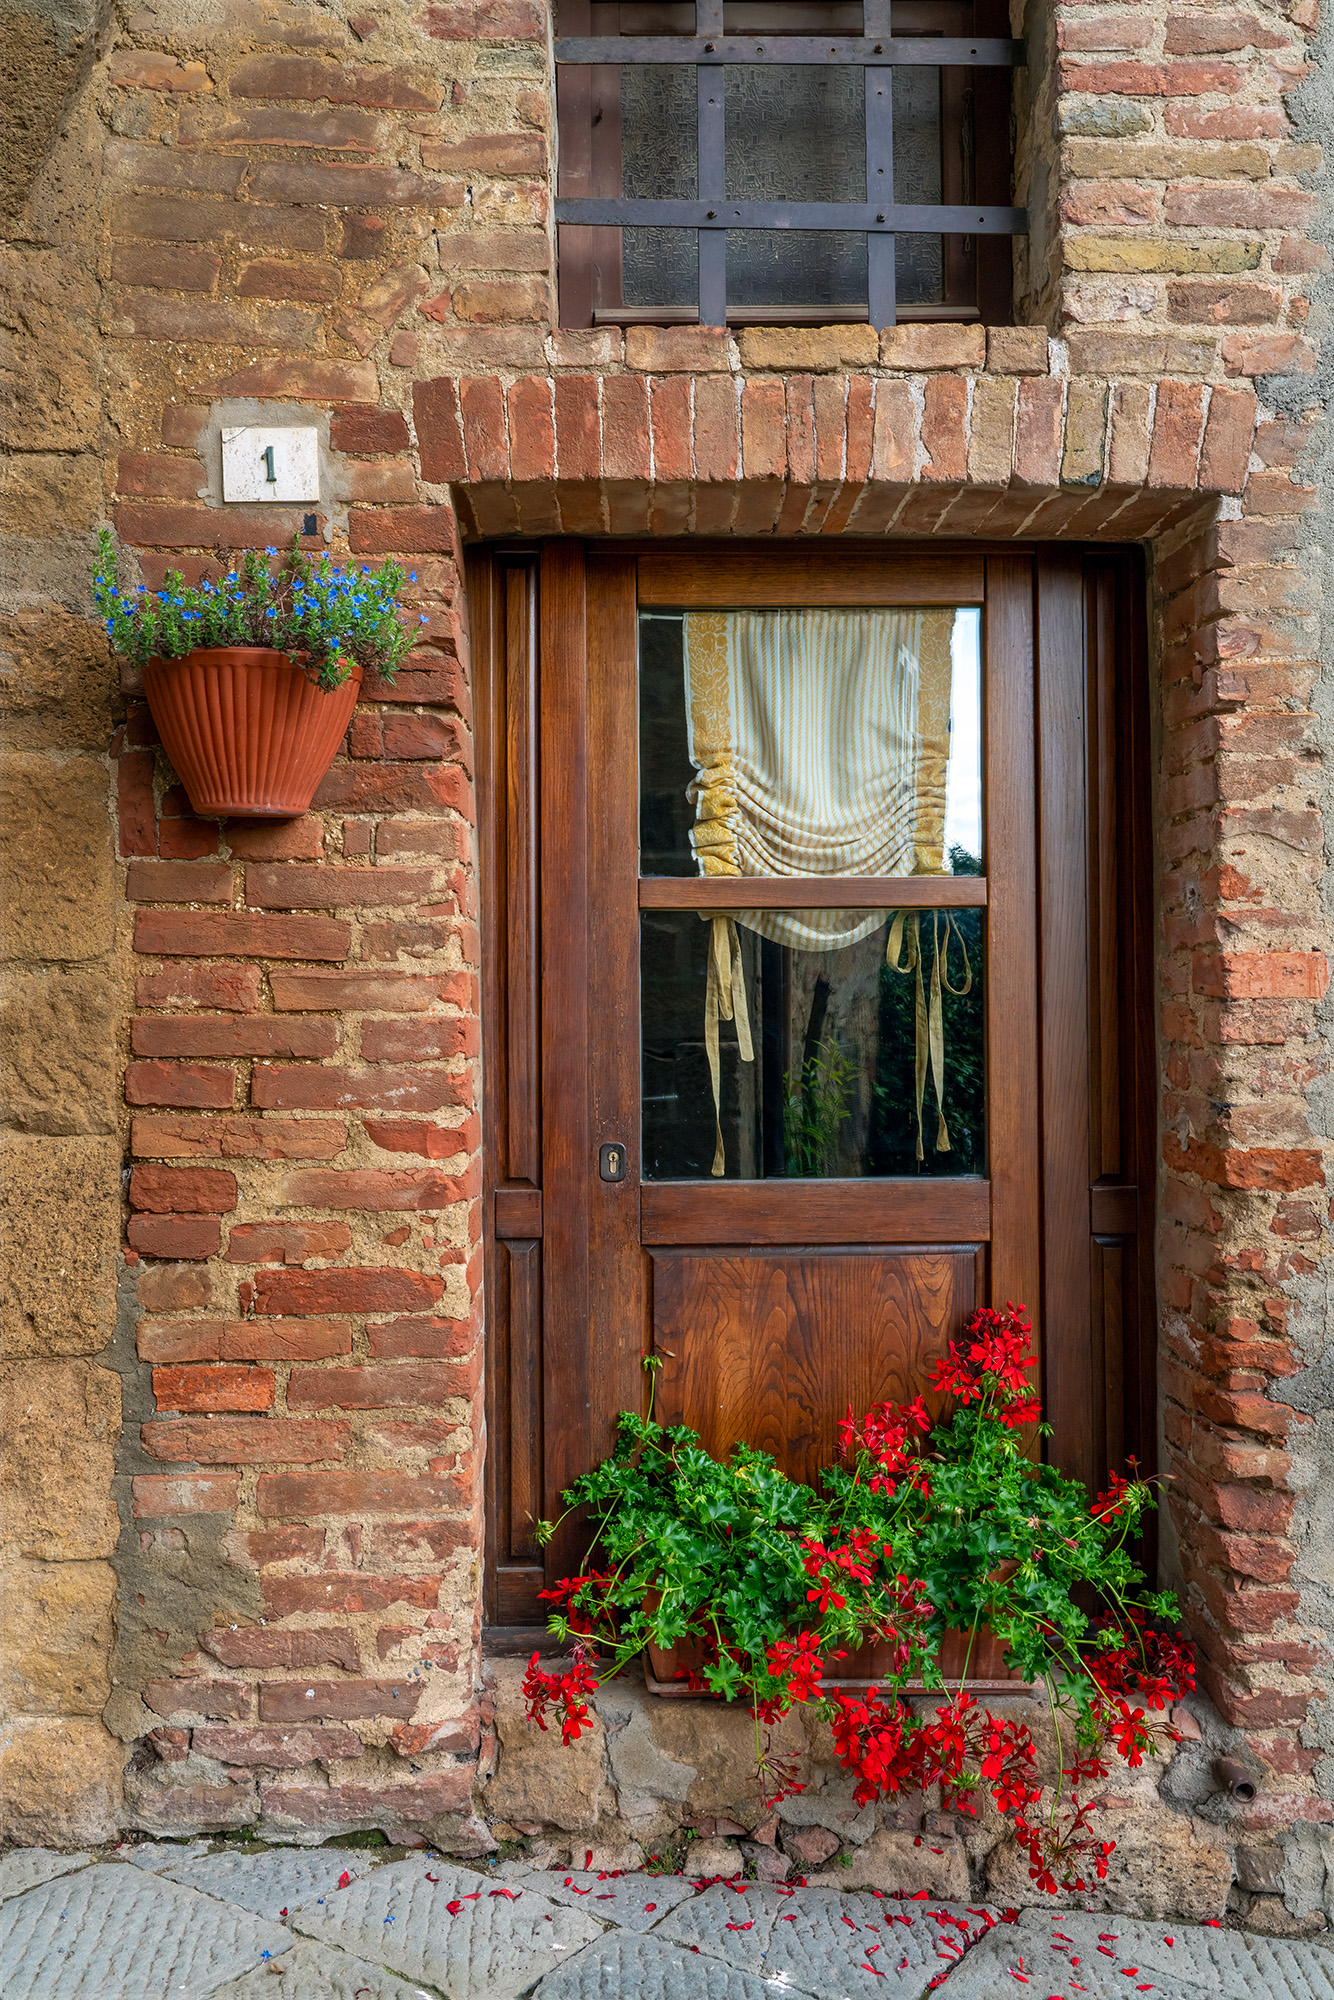 A warm and inviting doorfront photograph from Montepulciano, Italy, captures the essence of this charming town. The rustic door...